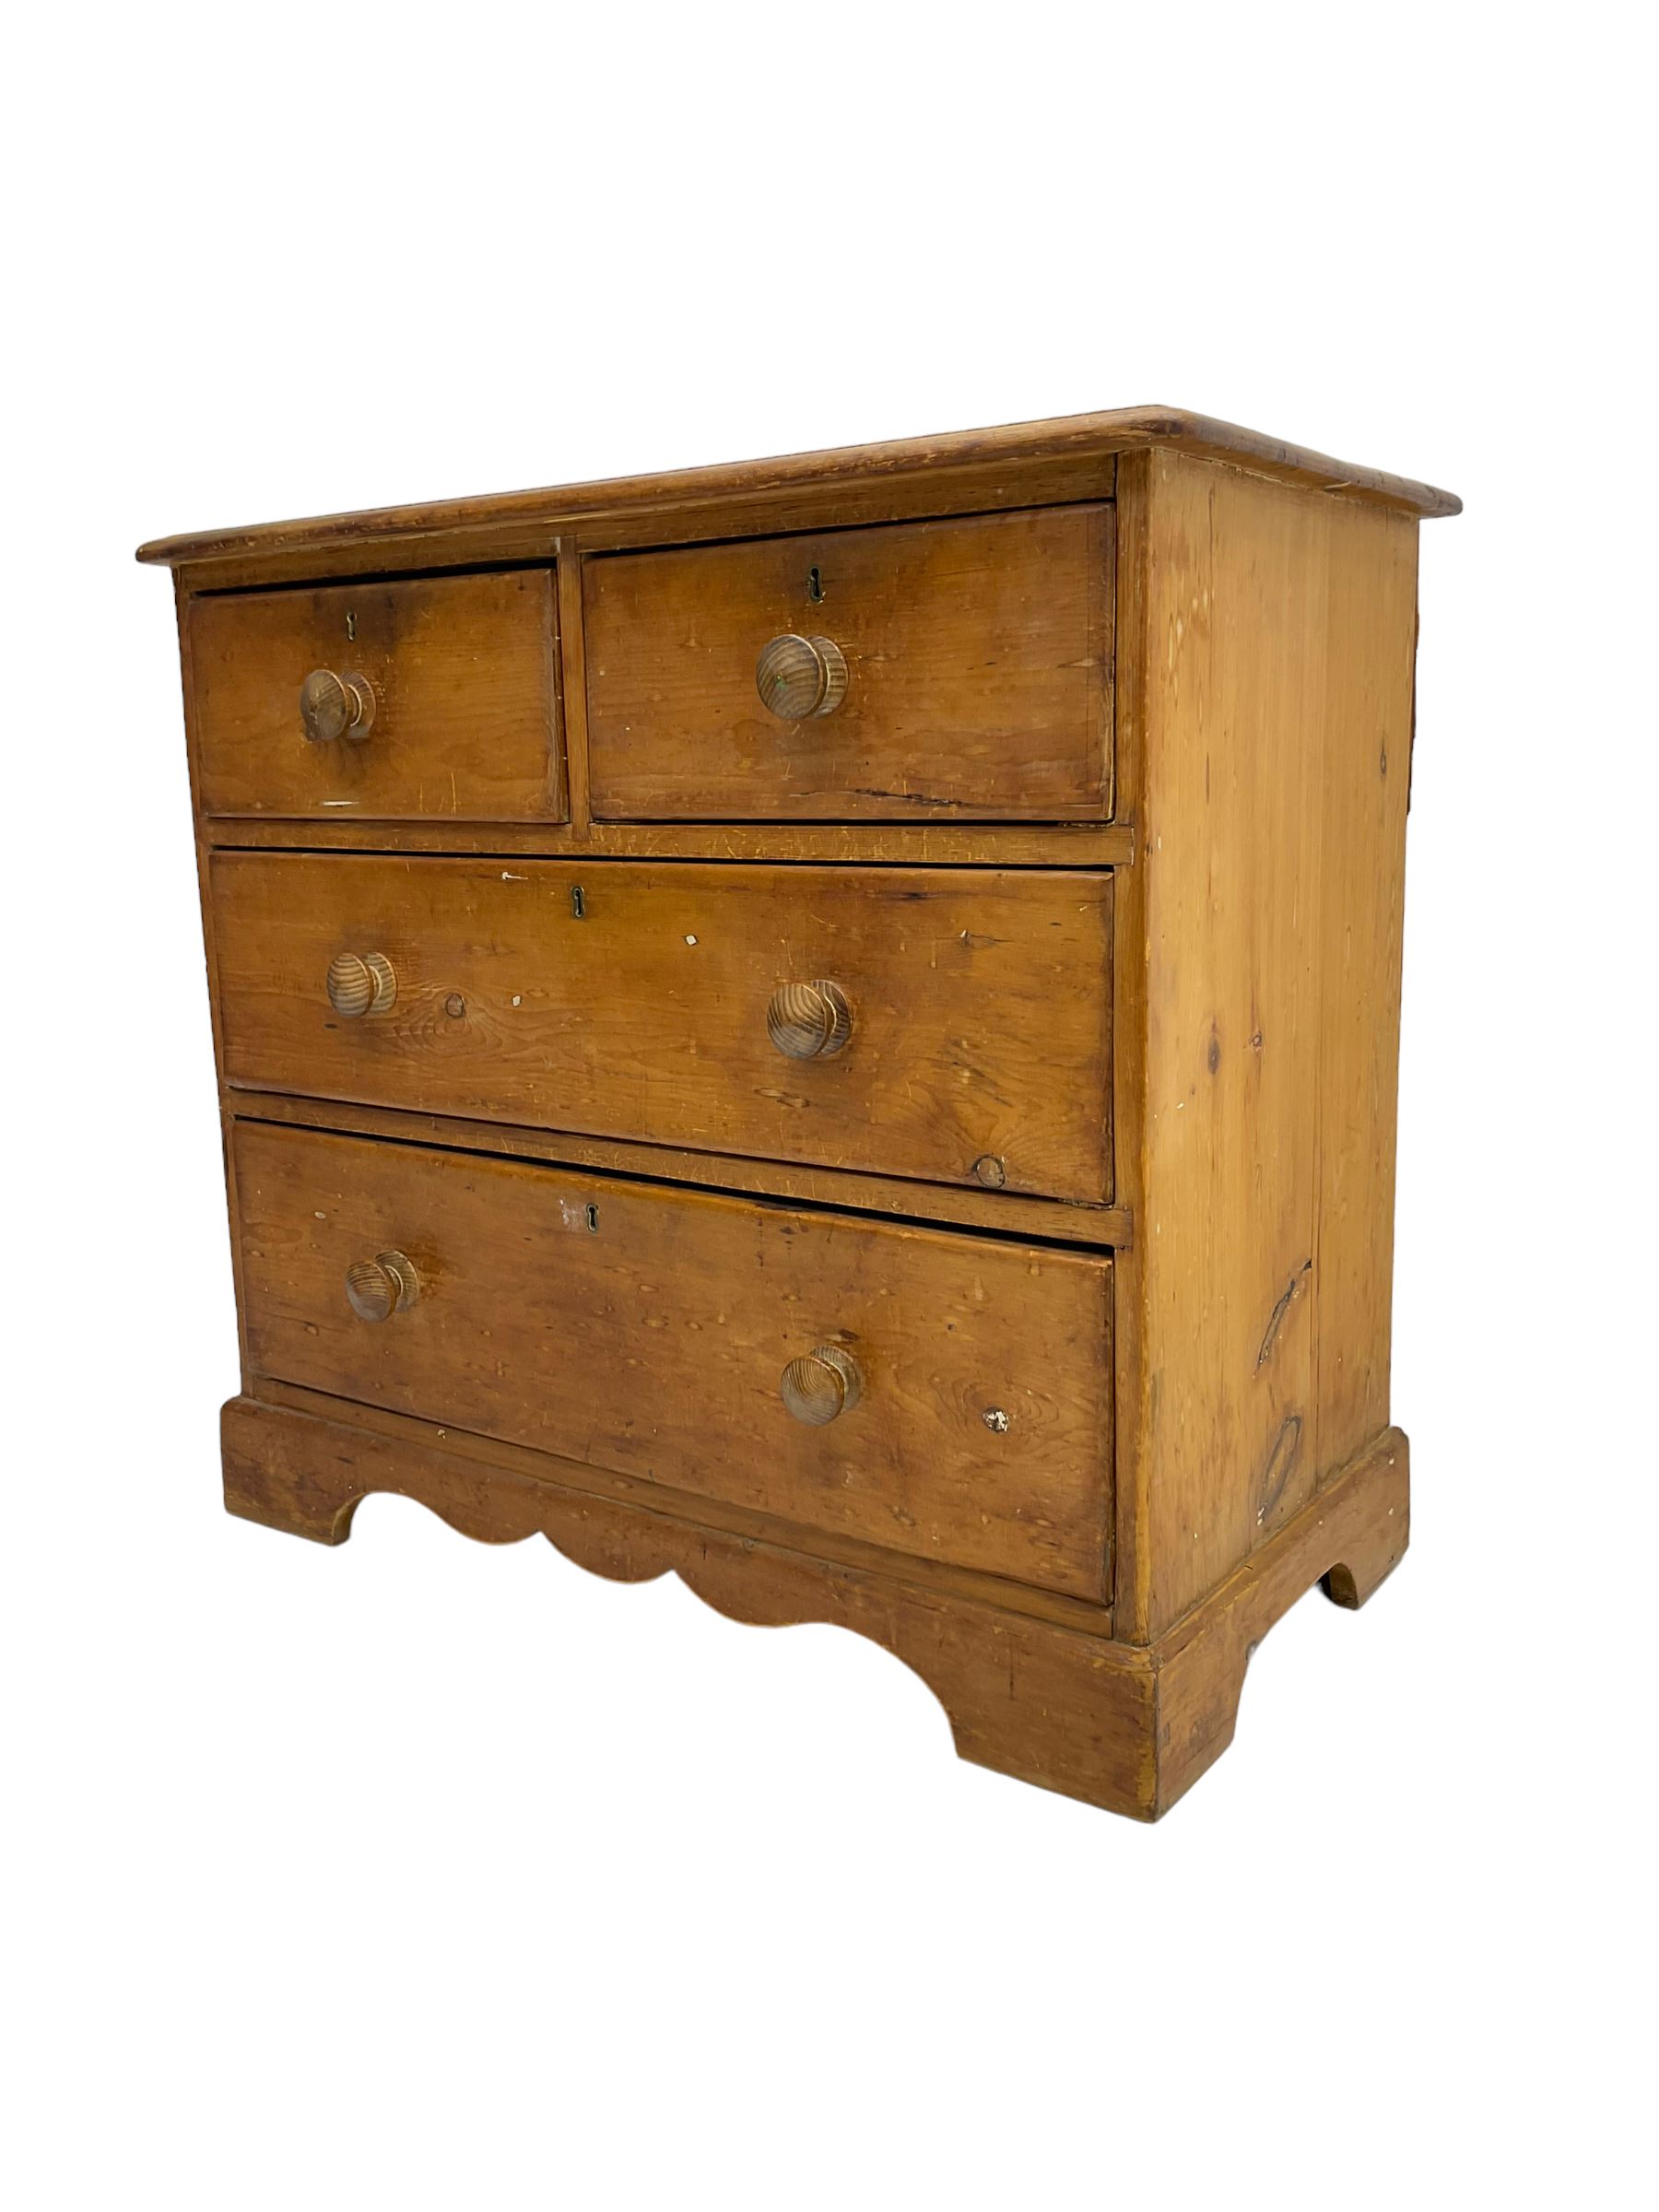 Late 19th century waxed pine chest - Image 2 of 8